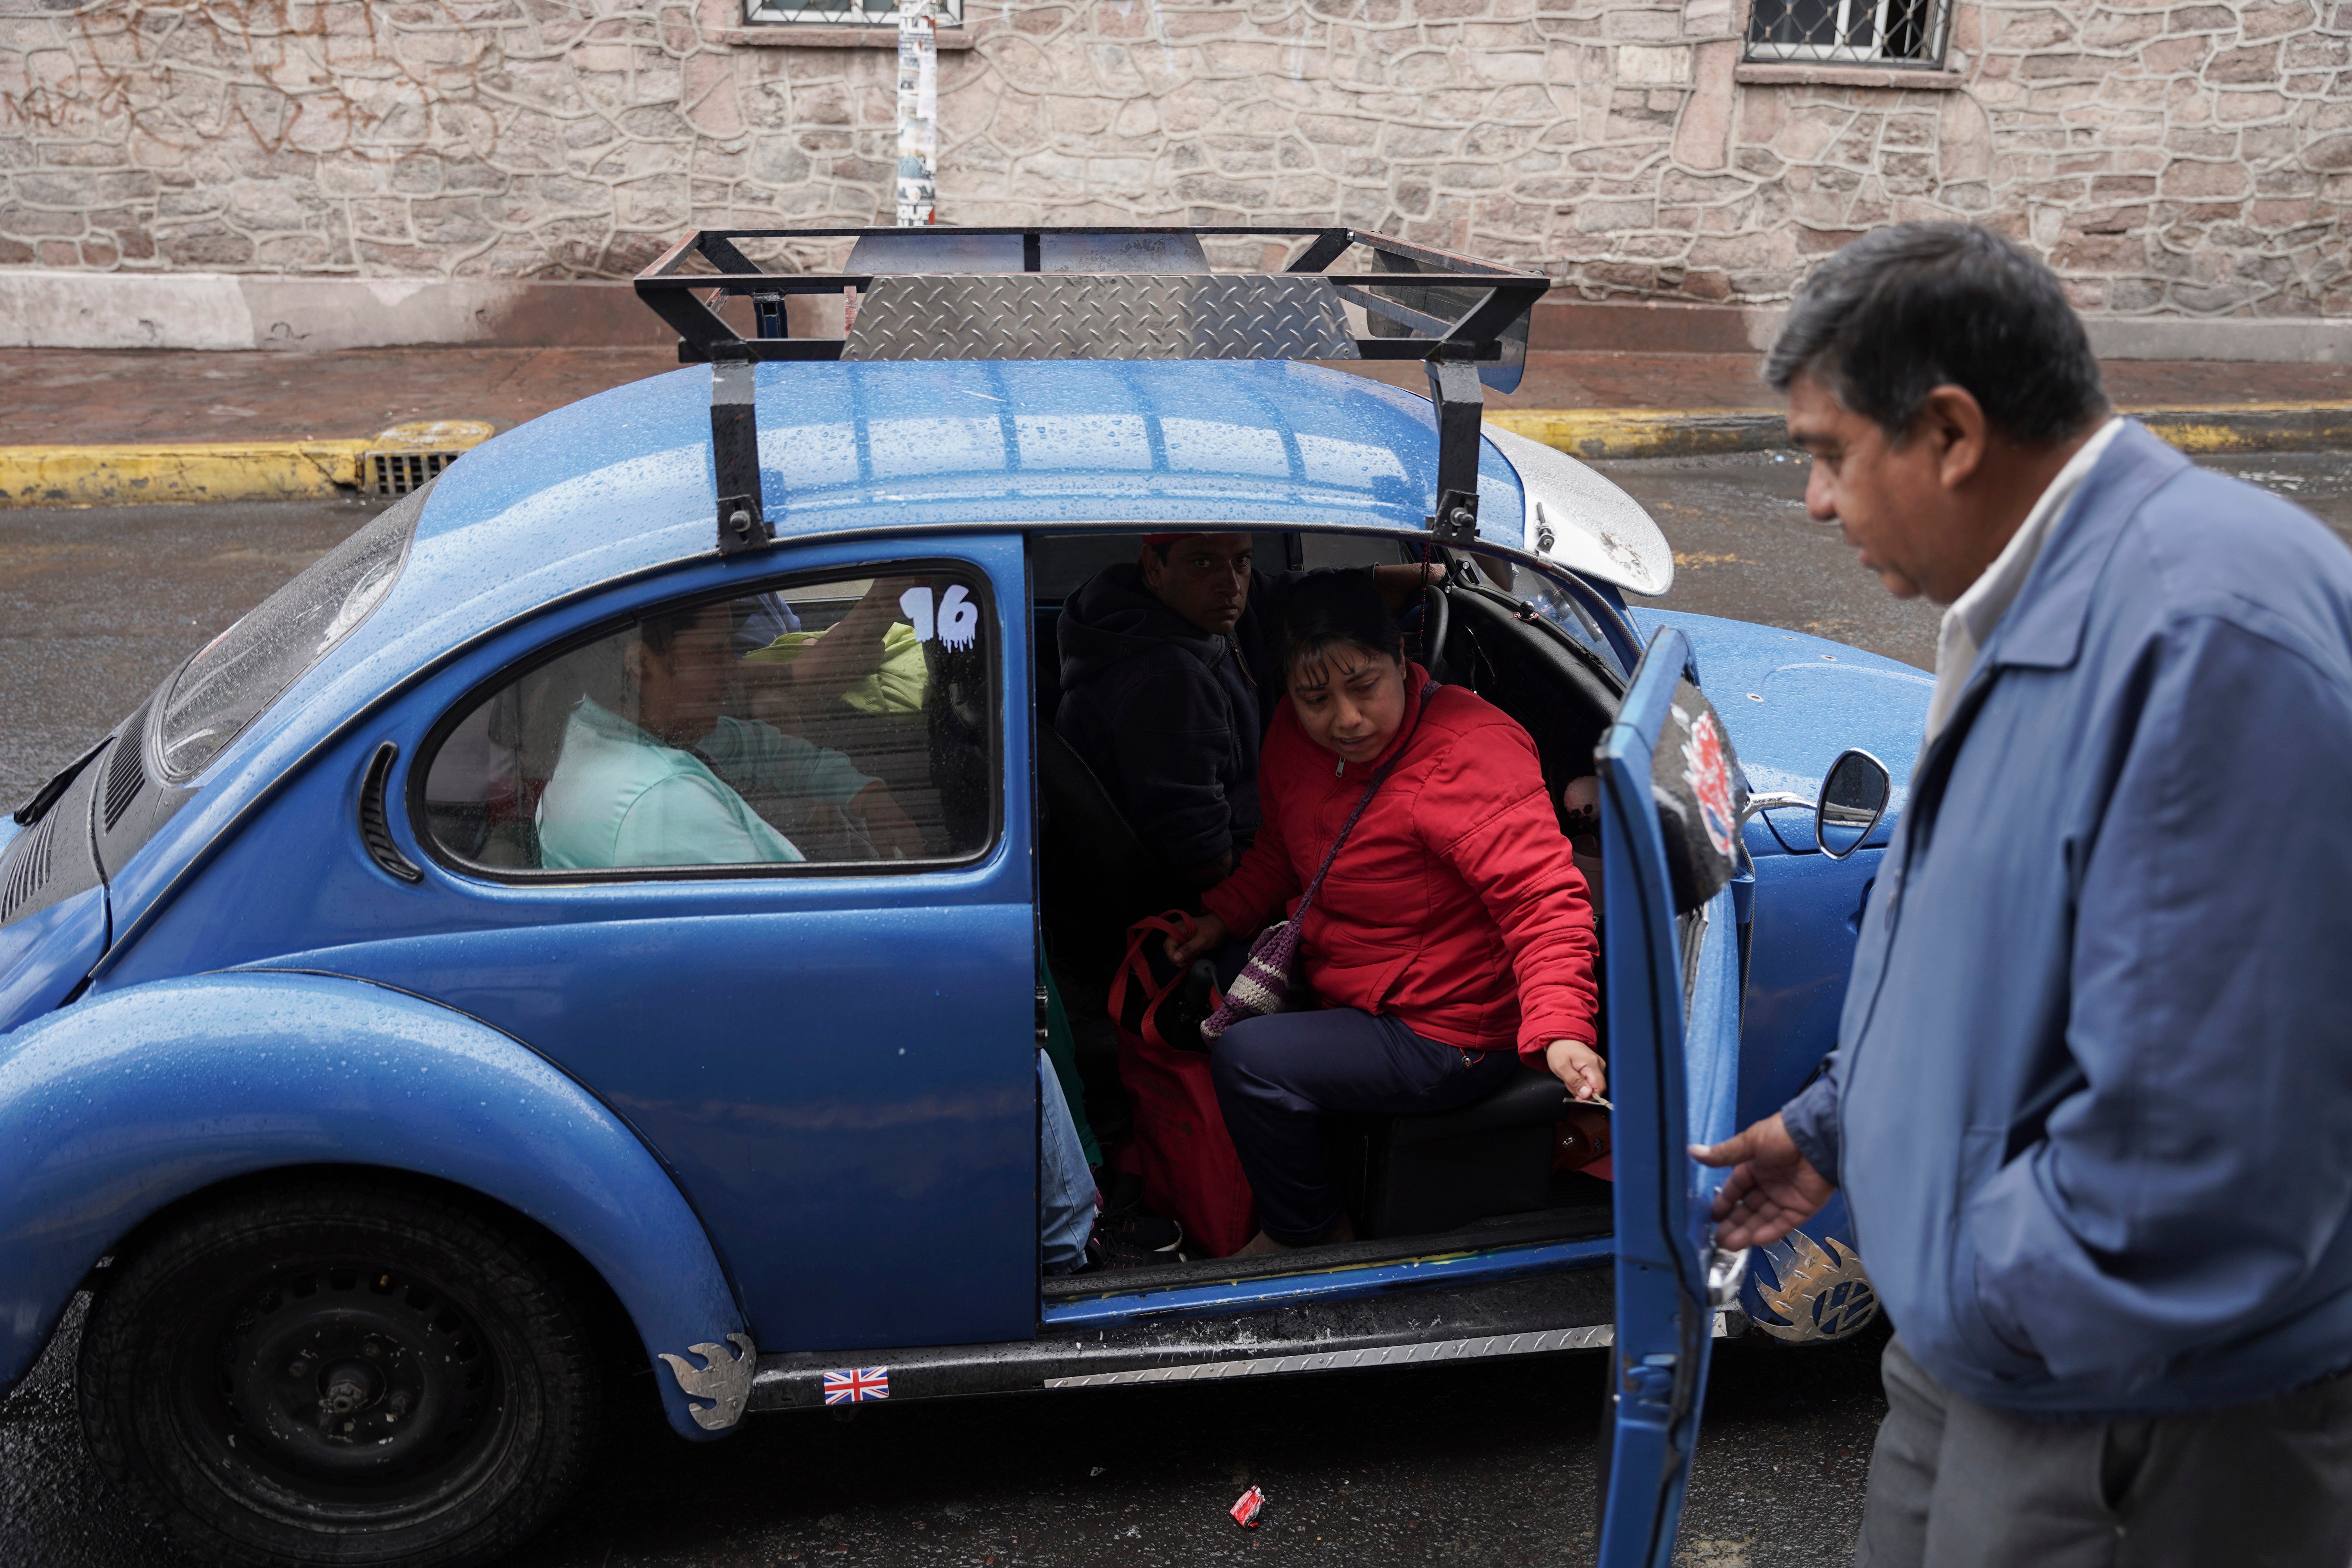 Taxi rank manager Rafael Ortega helps passengers into a Volkswagen Beetle in the Cuautepec neighborhood of Mexico City